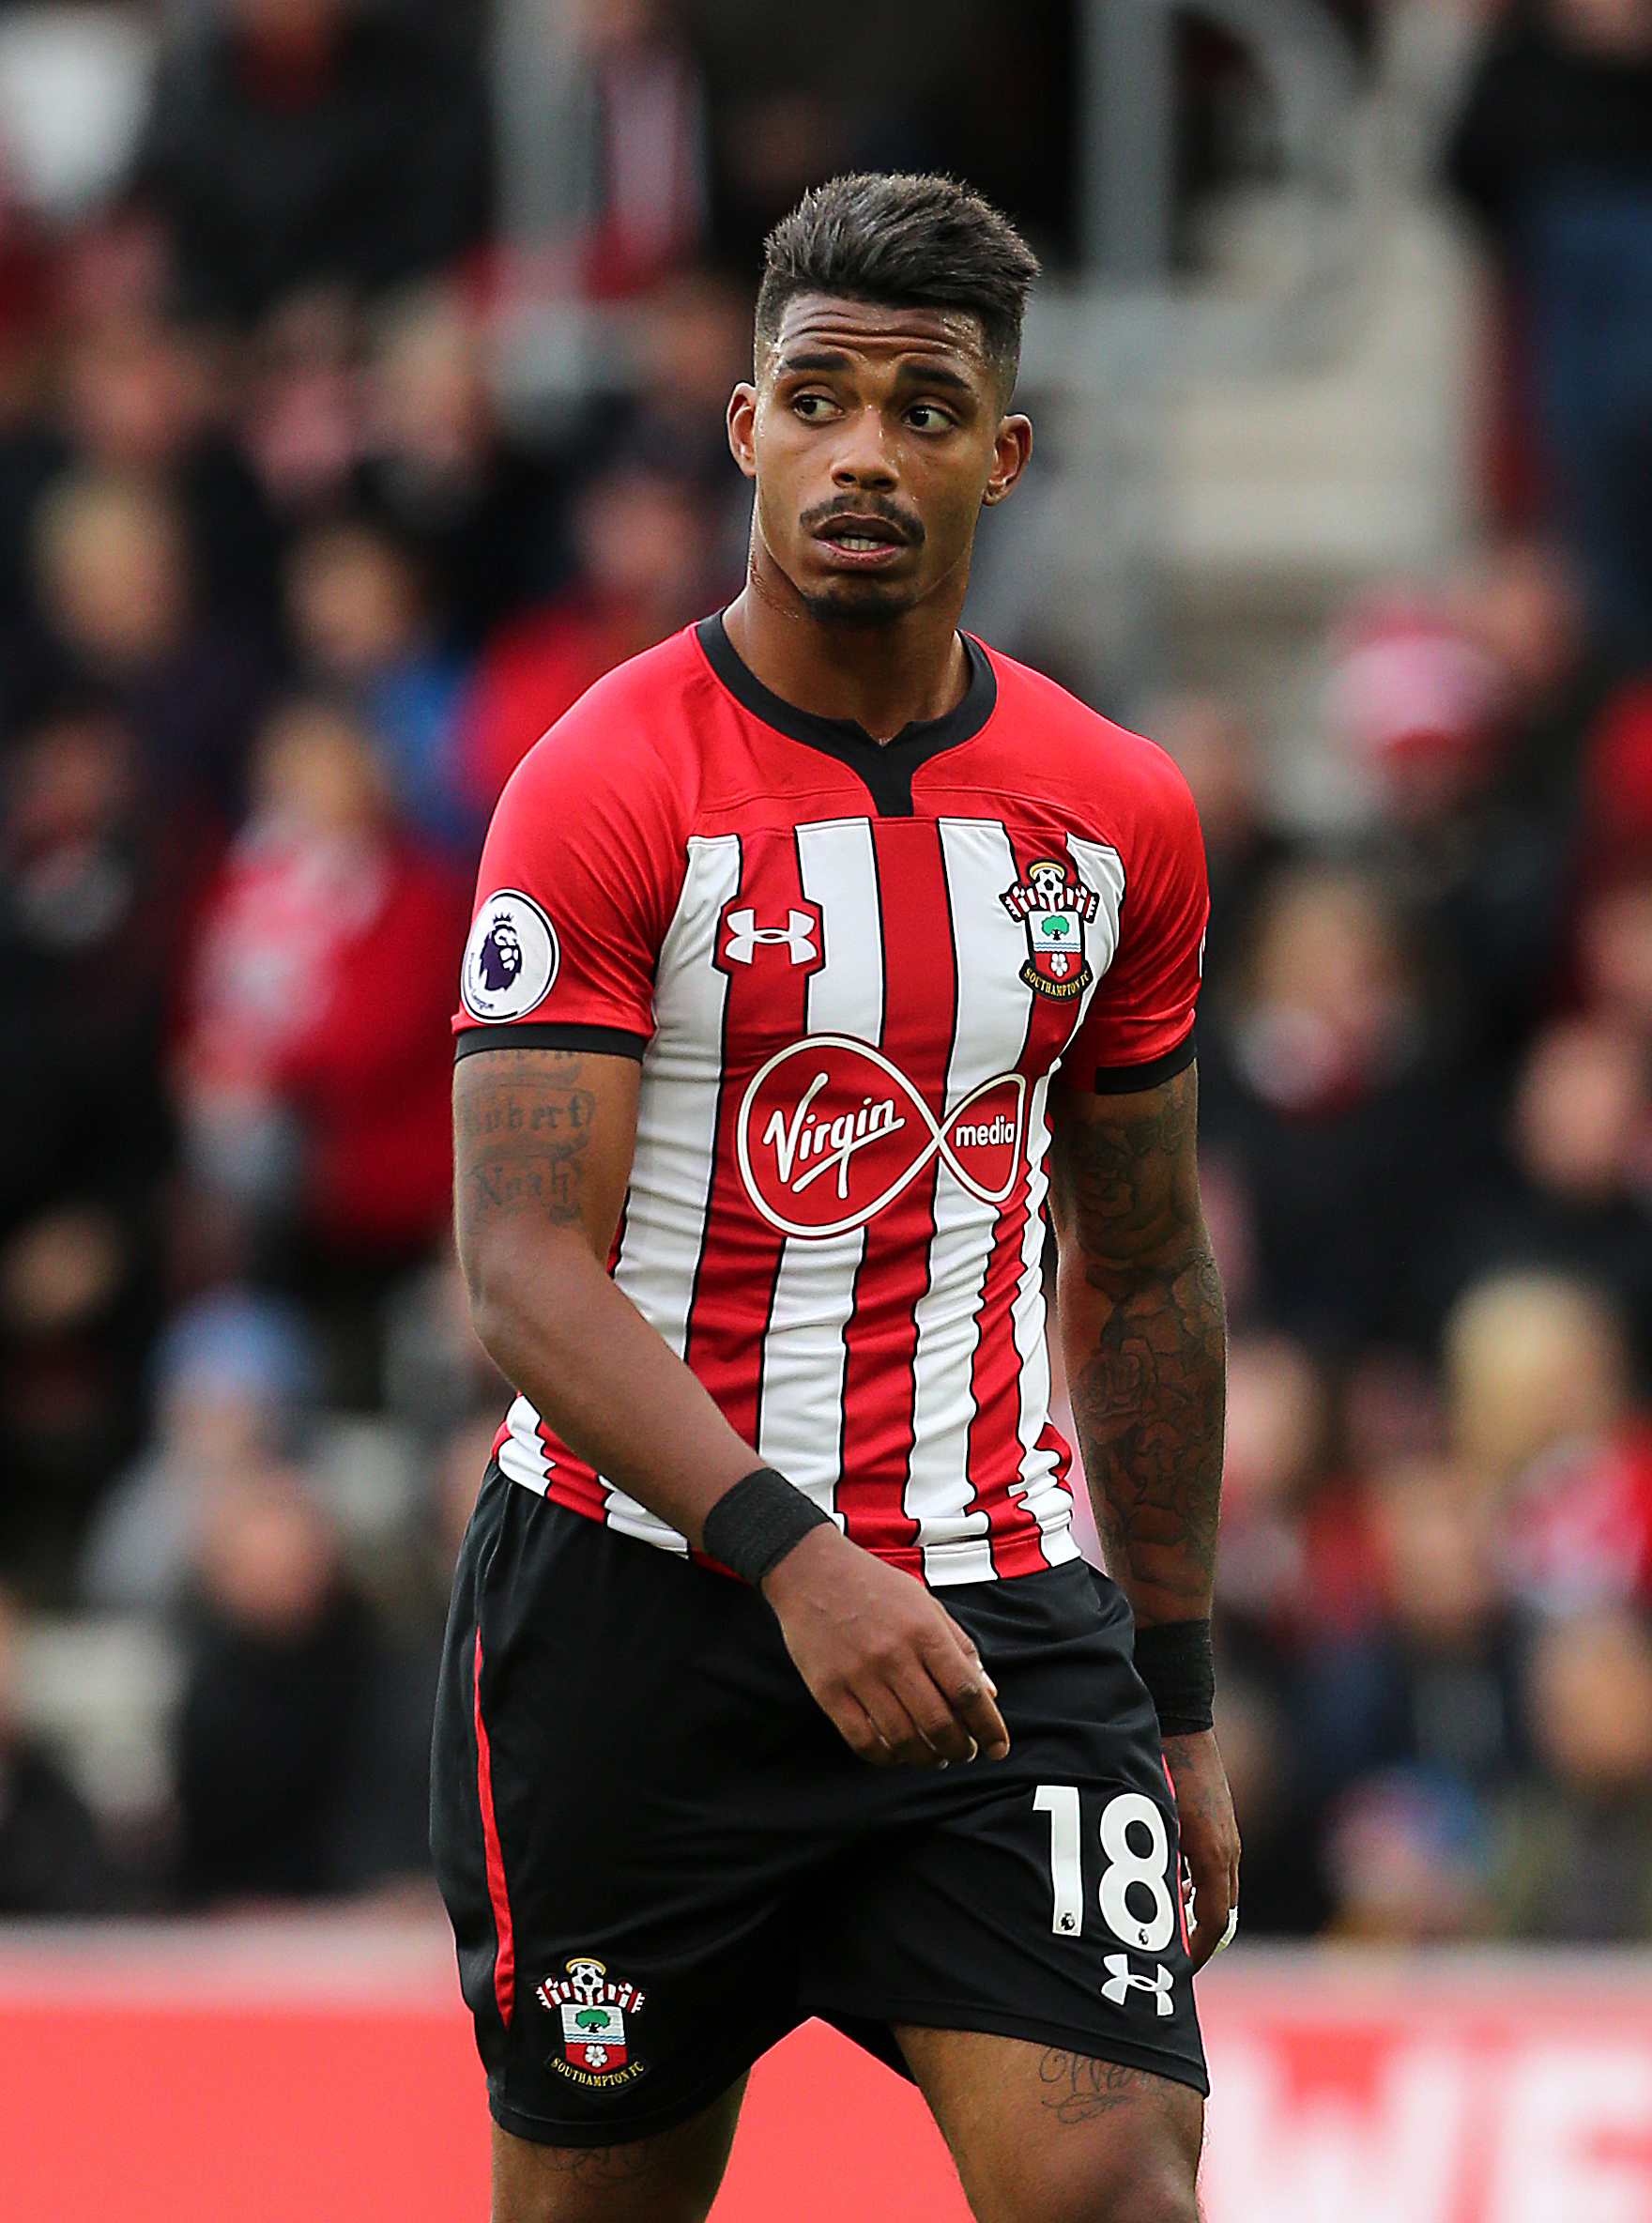 Southampton loanee Mario Lemina attracts interest from abroad